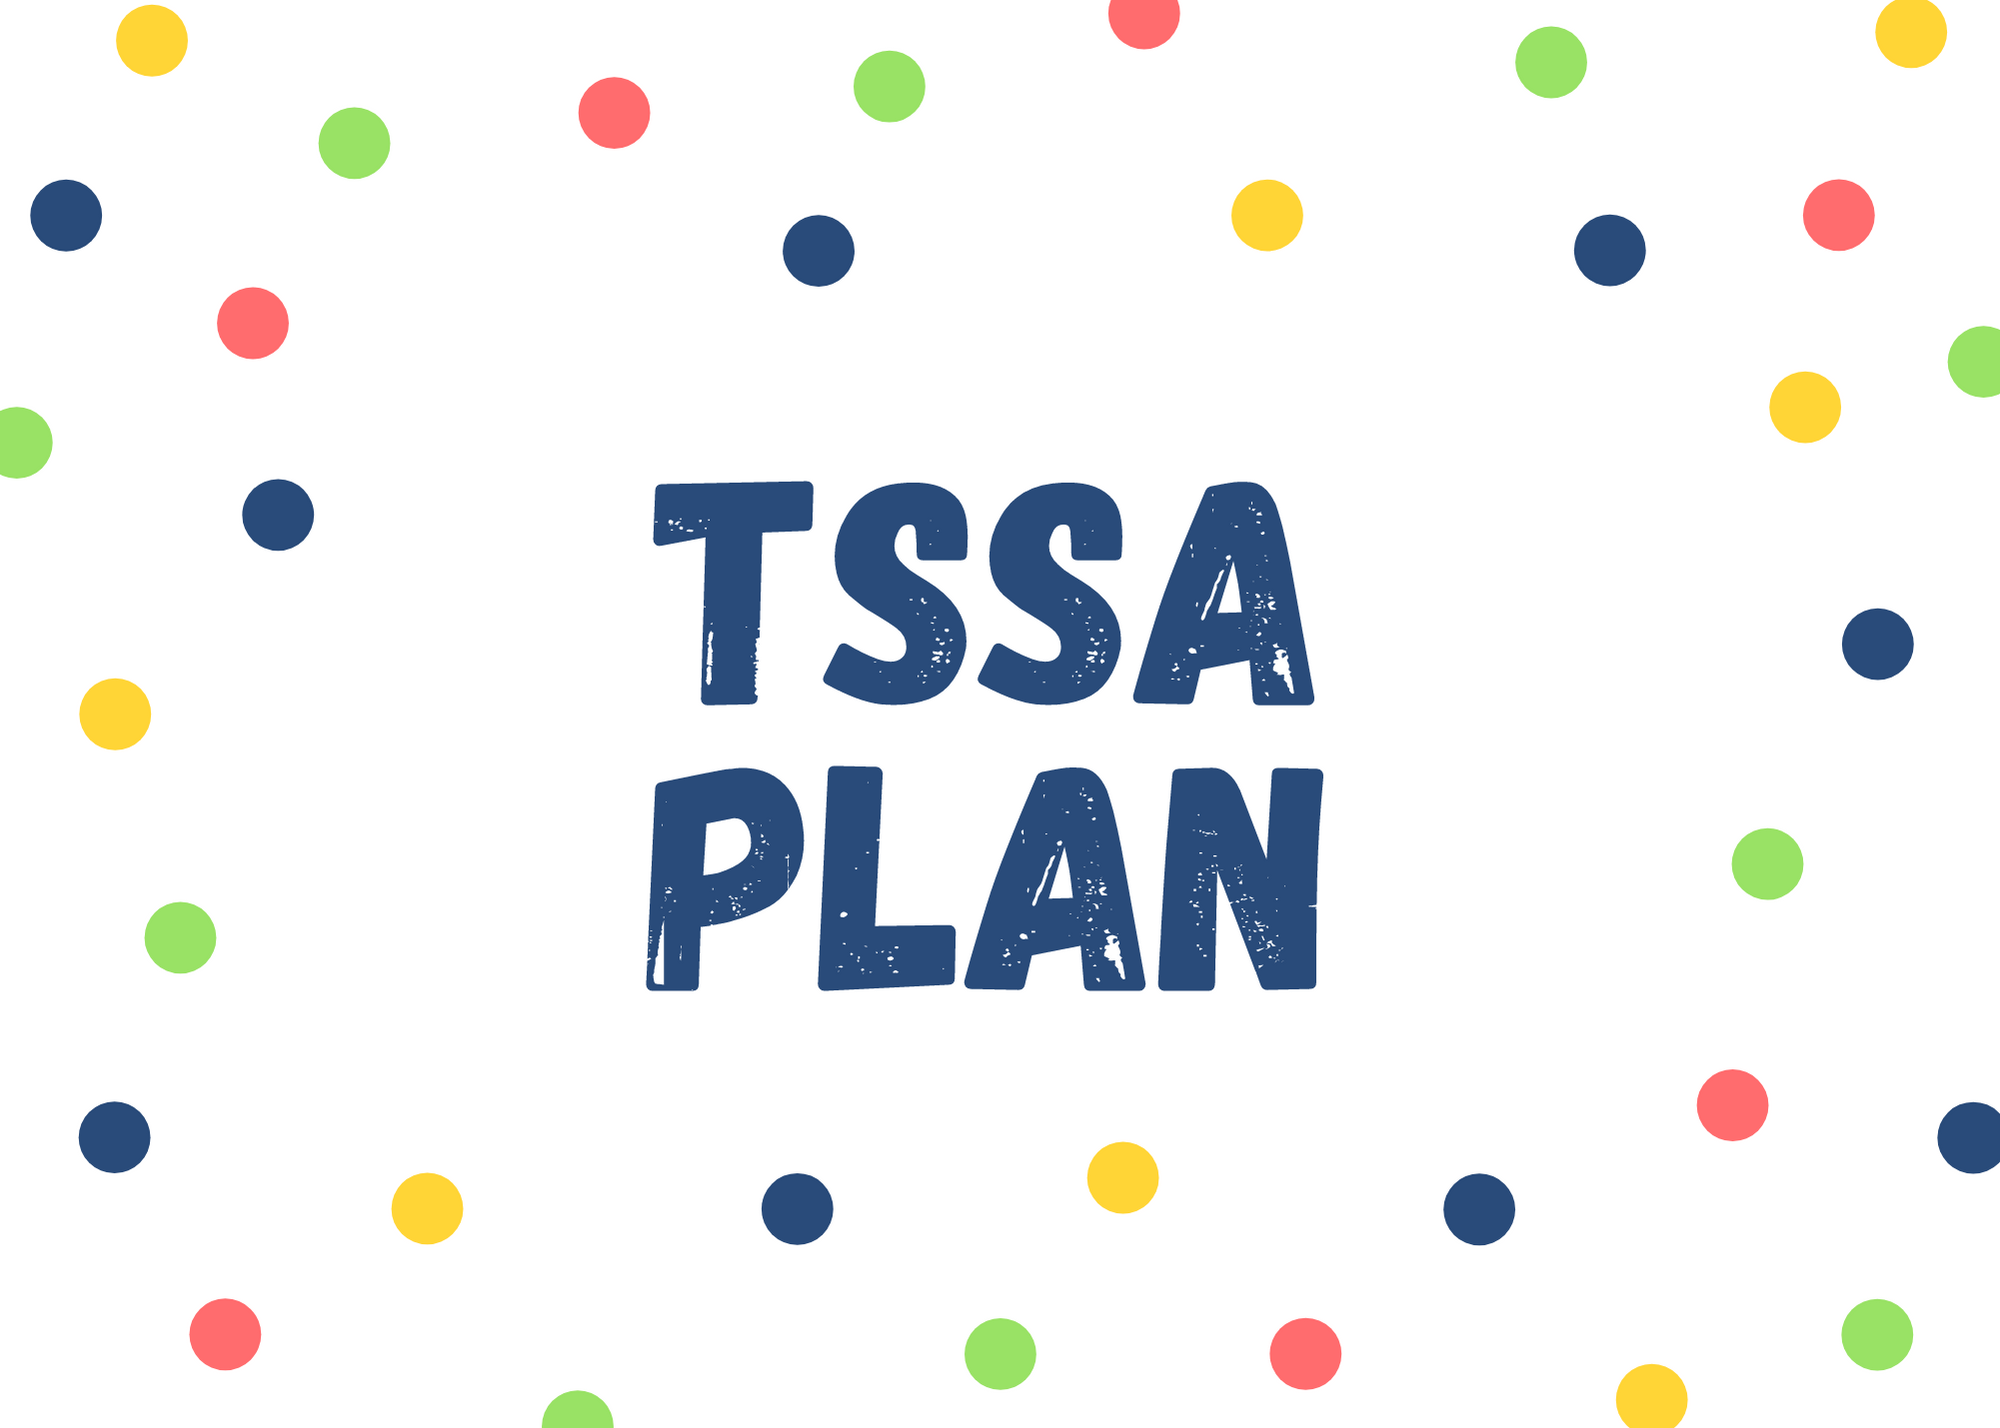 t s s a plan